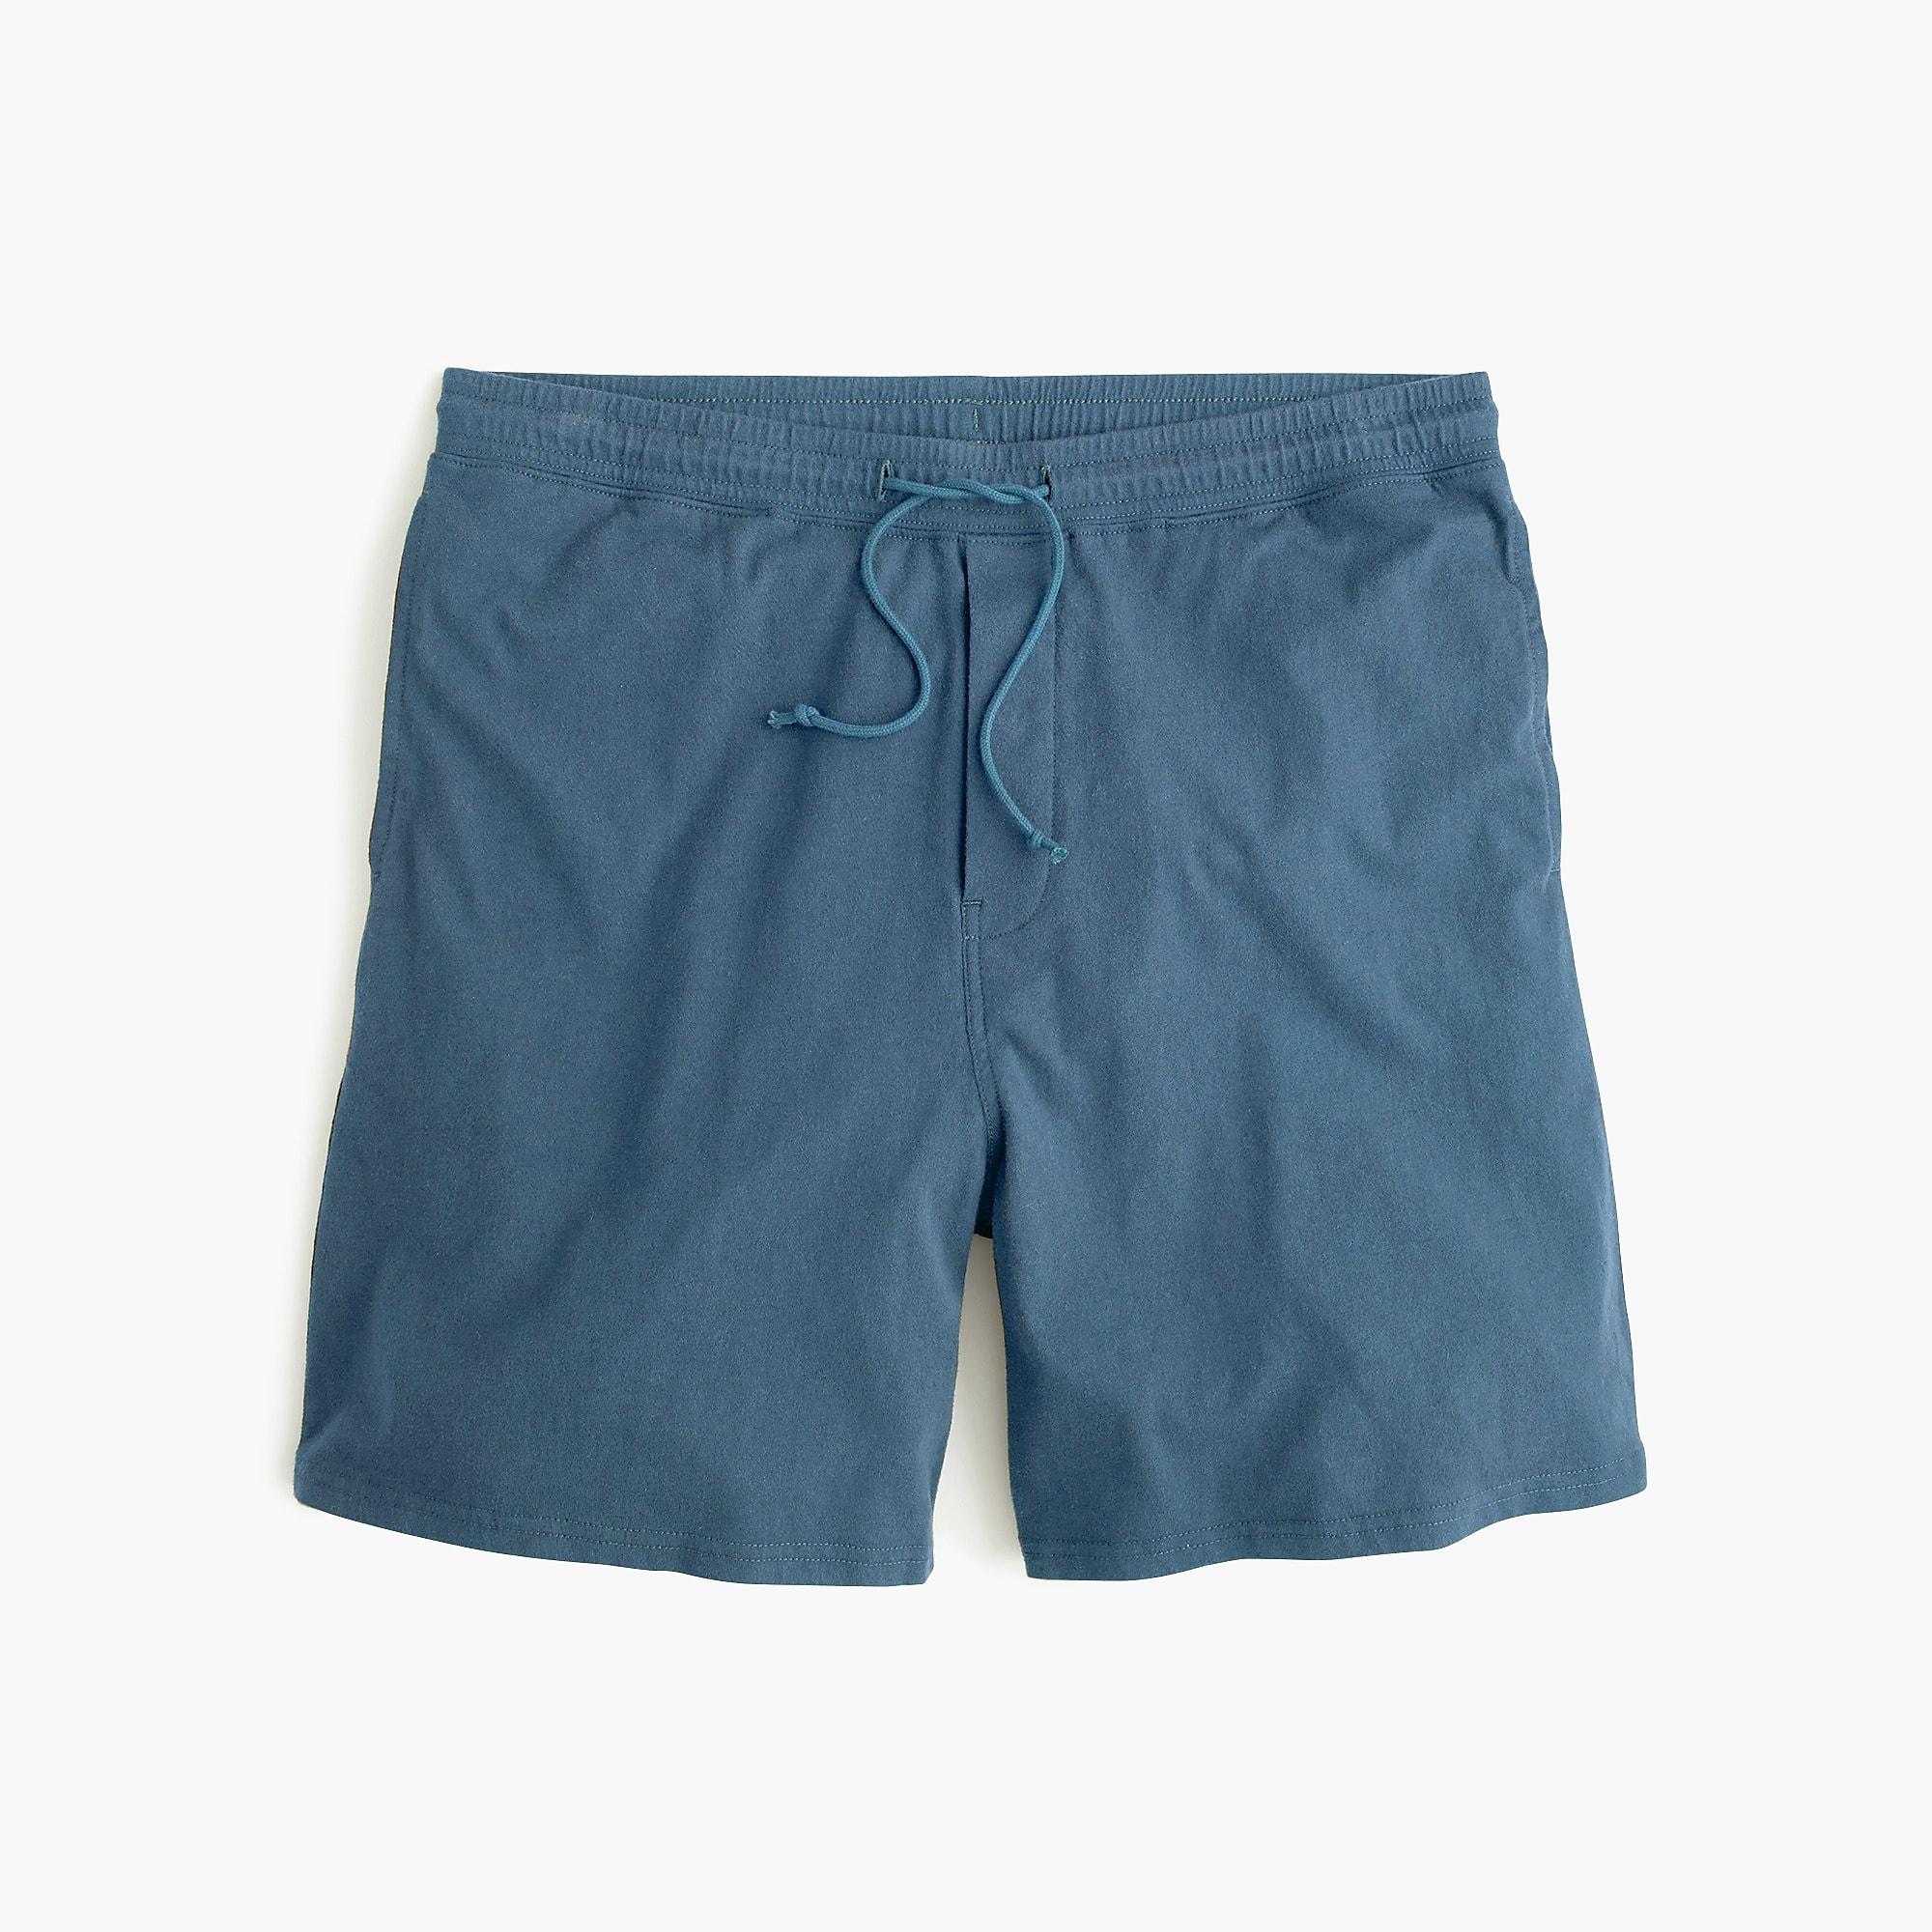 J.Crew Cotton Jersey Pajama Short in Blue for Men - Lyst